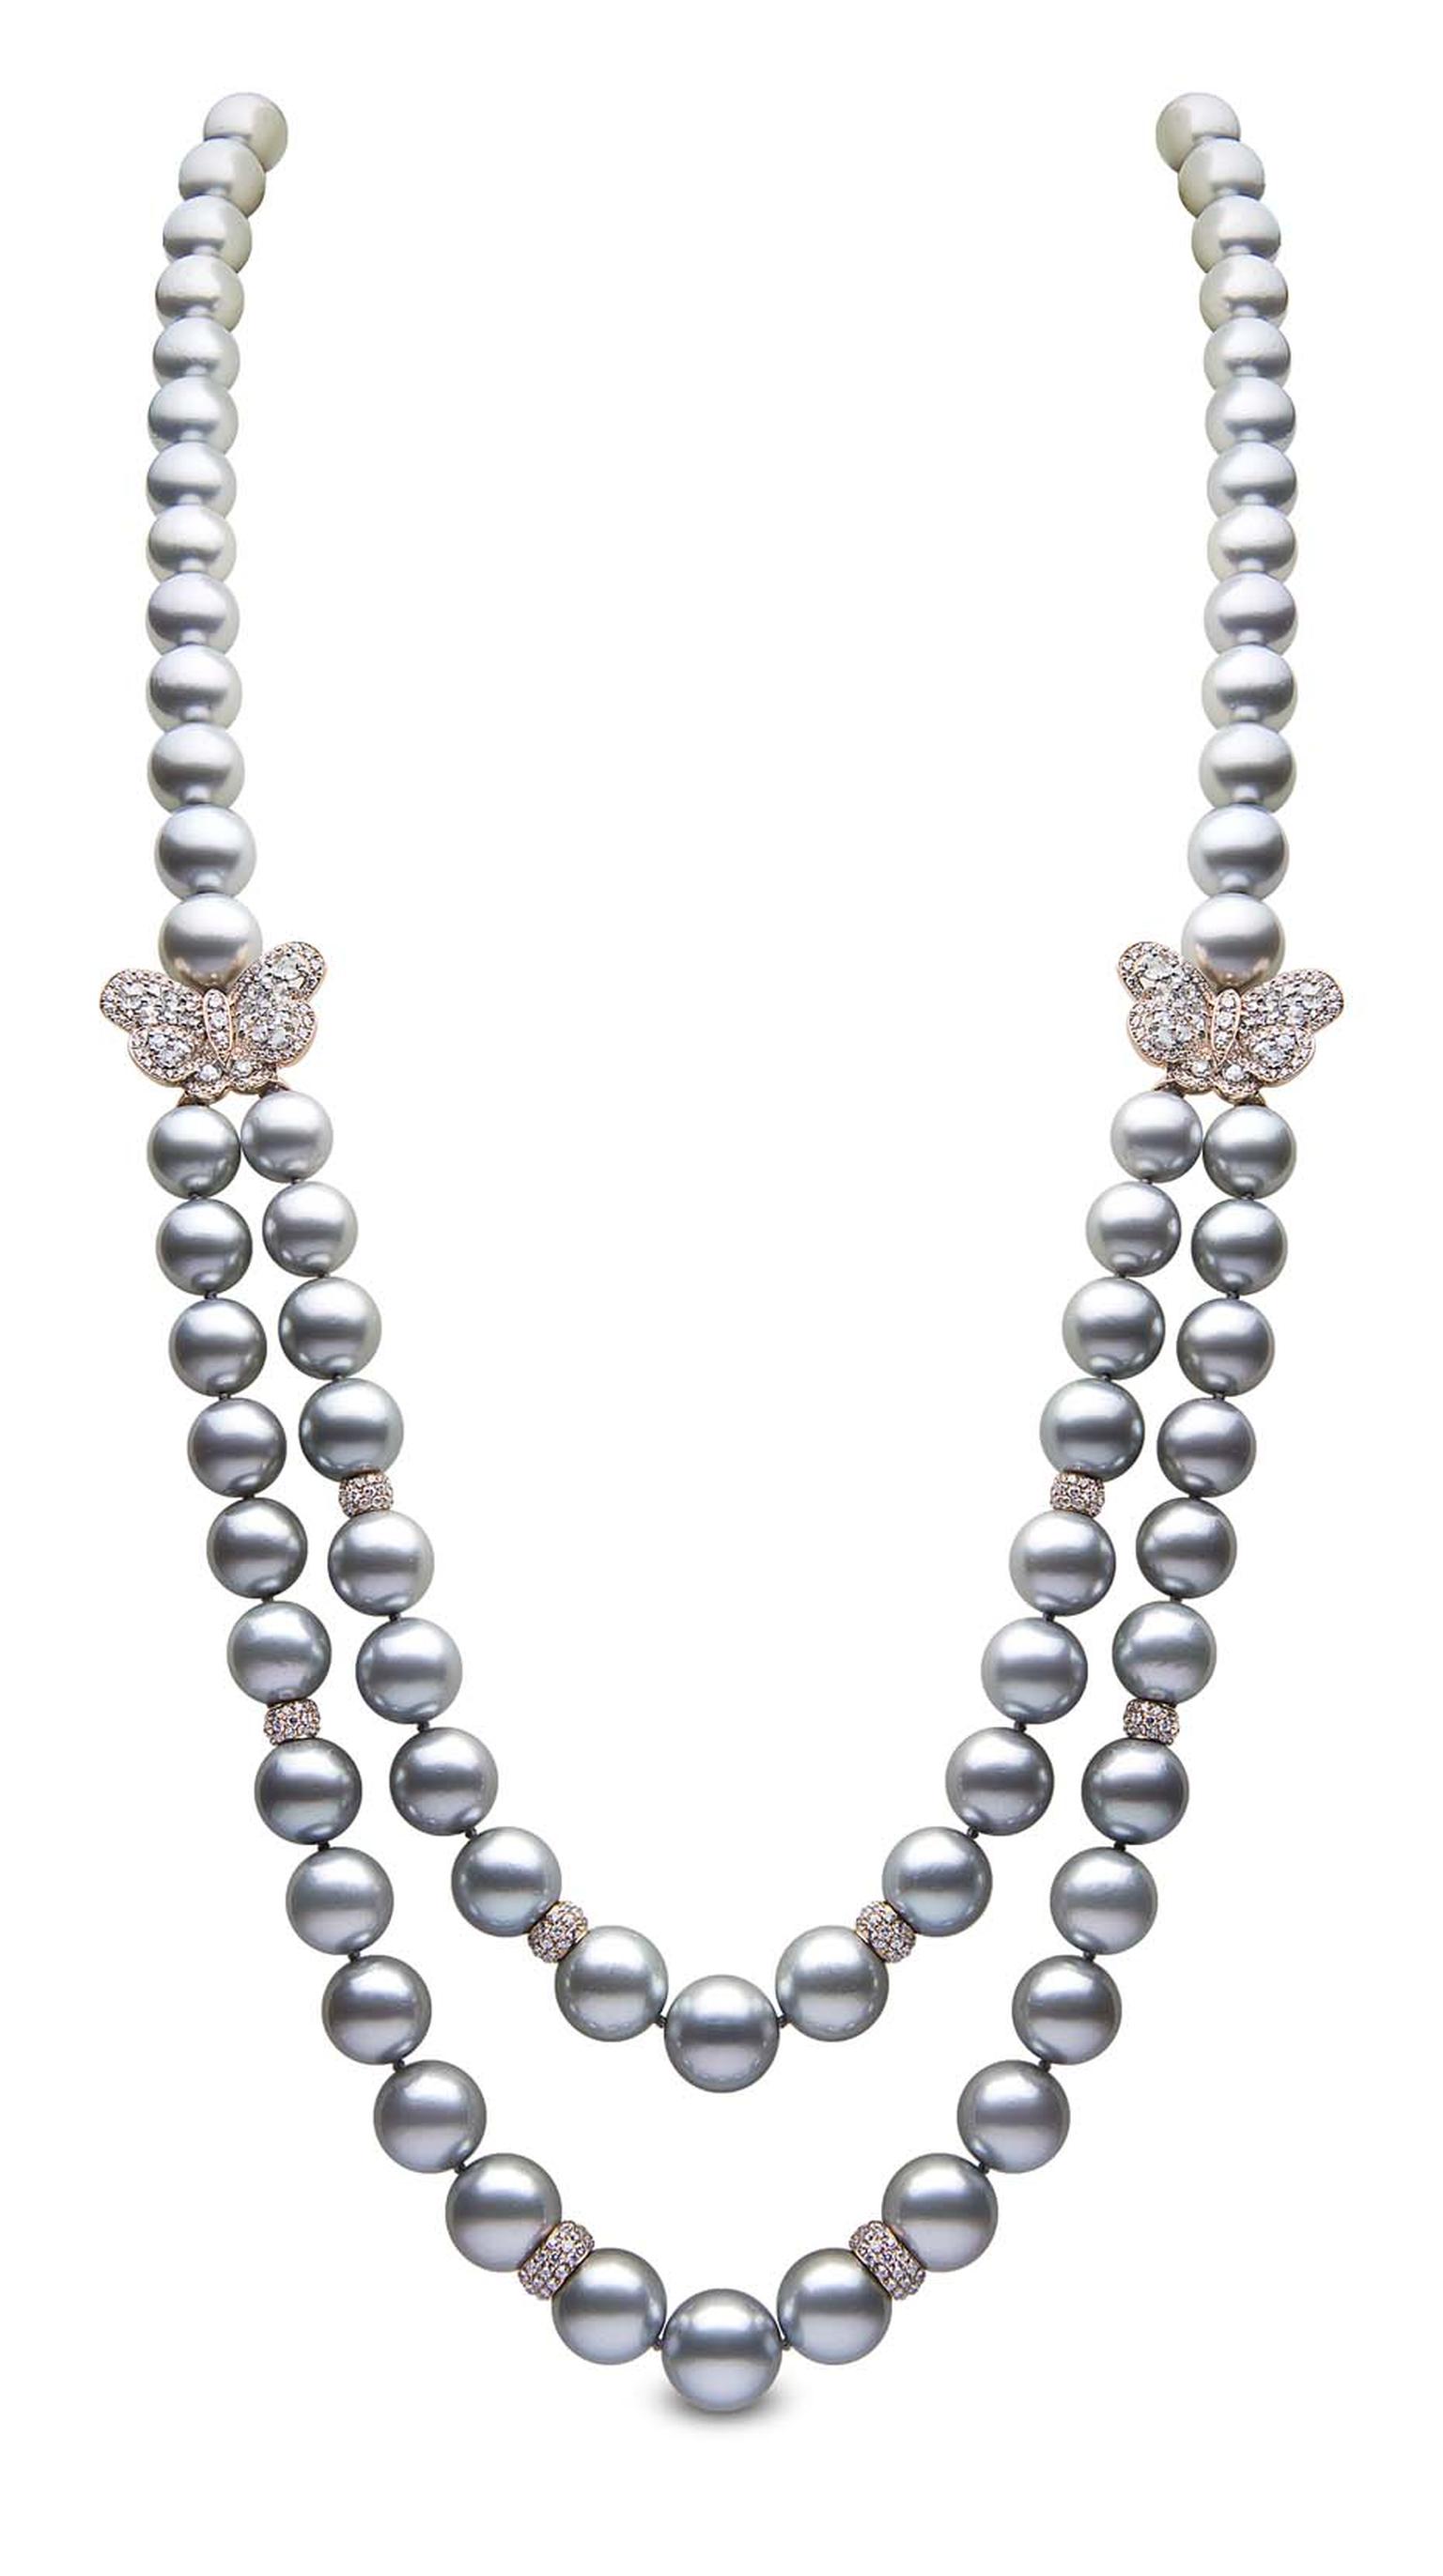 YOKO London double strand pearl necklace in rose gold, set with Tahitian pearls and diamond butterflies.